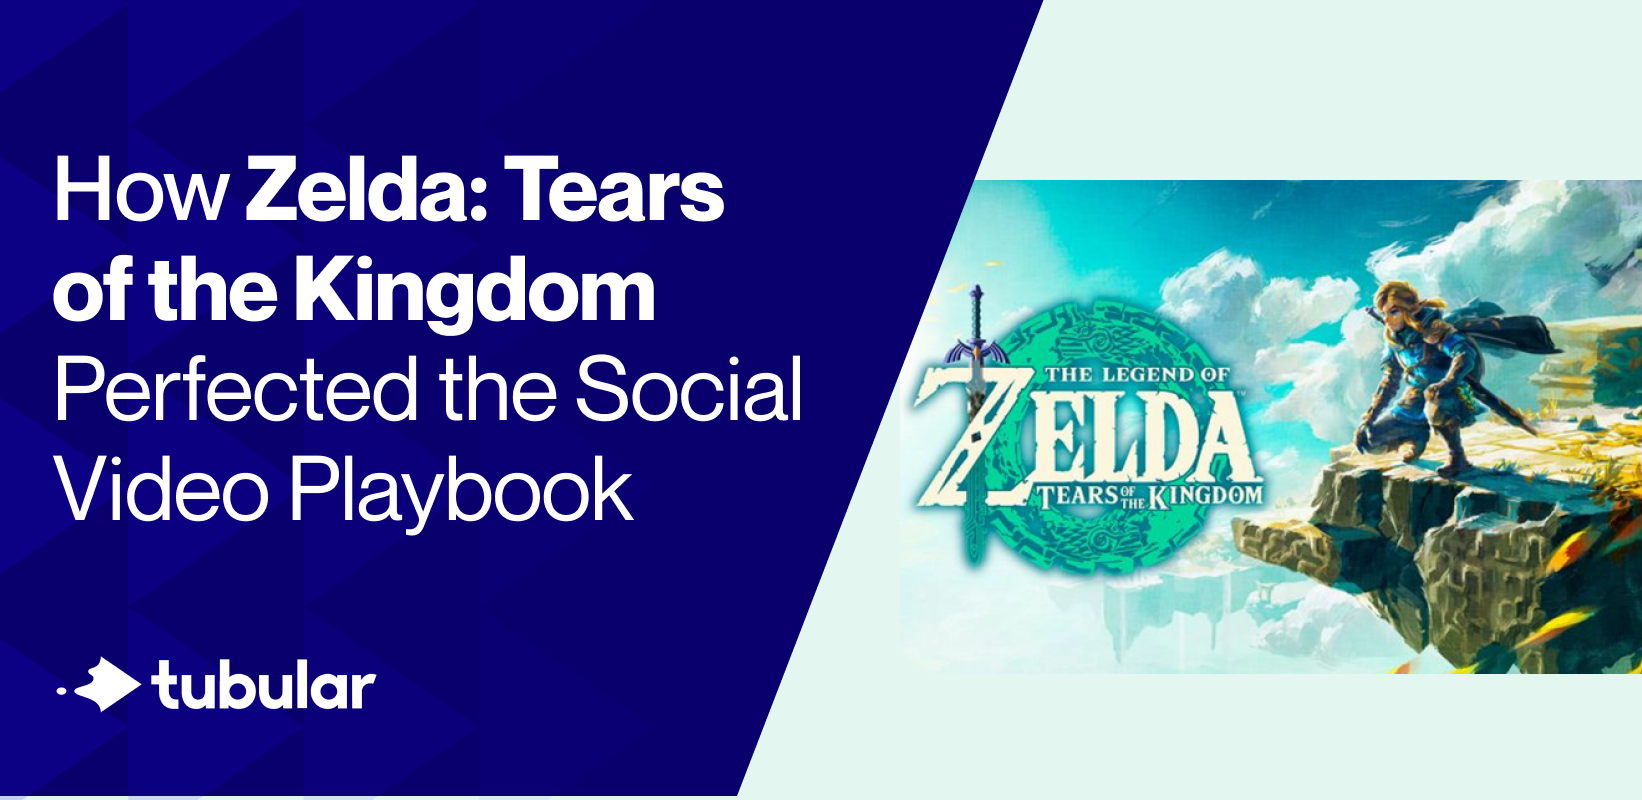 How Zelda: Tears of the Kingdom Perfected the Social Video Playbook